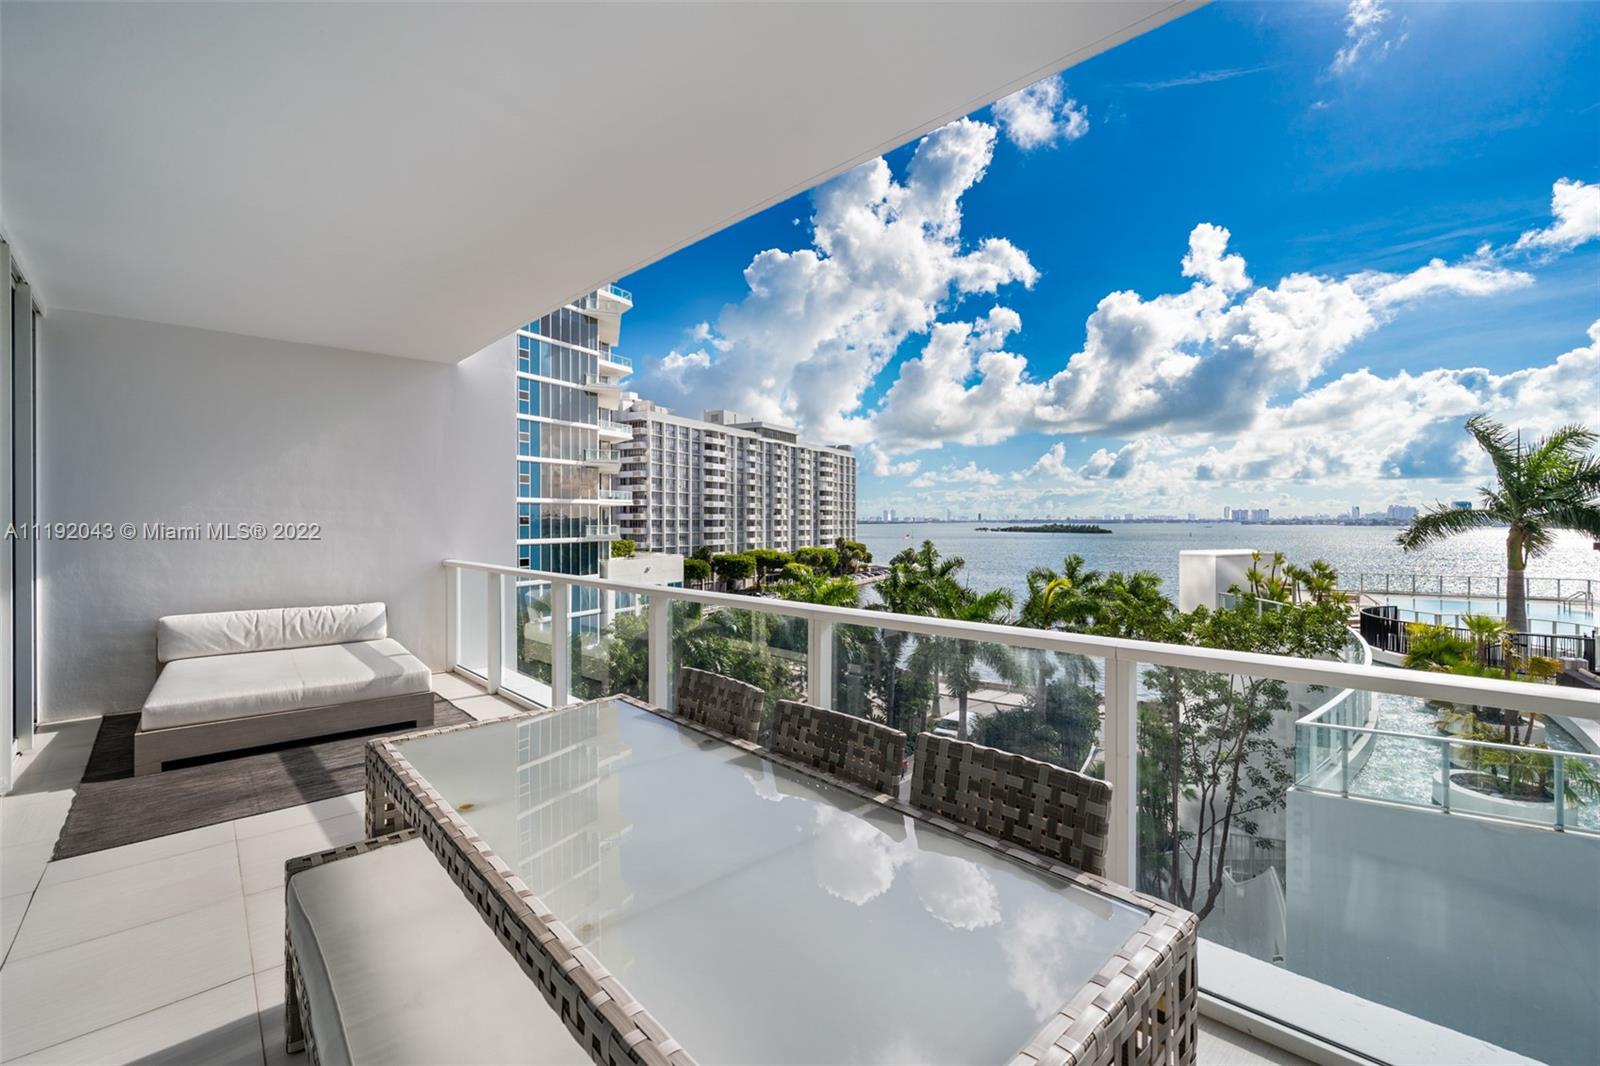 Welcome to Paramount Bay; The definition of Luxury Living in Edgewater Miami. This unit features 2 beds & 2 baths and a private elevator foyer. Enjoy this spacious floor plan perfectly designed for a seamless flow of indoor and outdoor living so you can enjoy the endless water views! The property is decorated with Restoration Hardware and custom Italian furnishings and features an oversized balcony with day bed and dining table for 6. The unit leads directly to the main pool area with cabanas, grill area, bar and fire pit. Other amenities include full service gym, spa, meeting rooms, kids room and 24 hour valet / concierge.